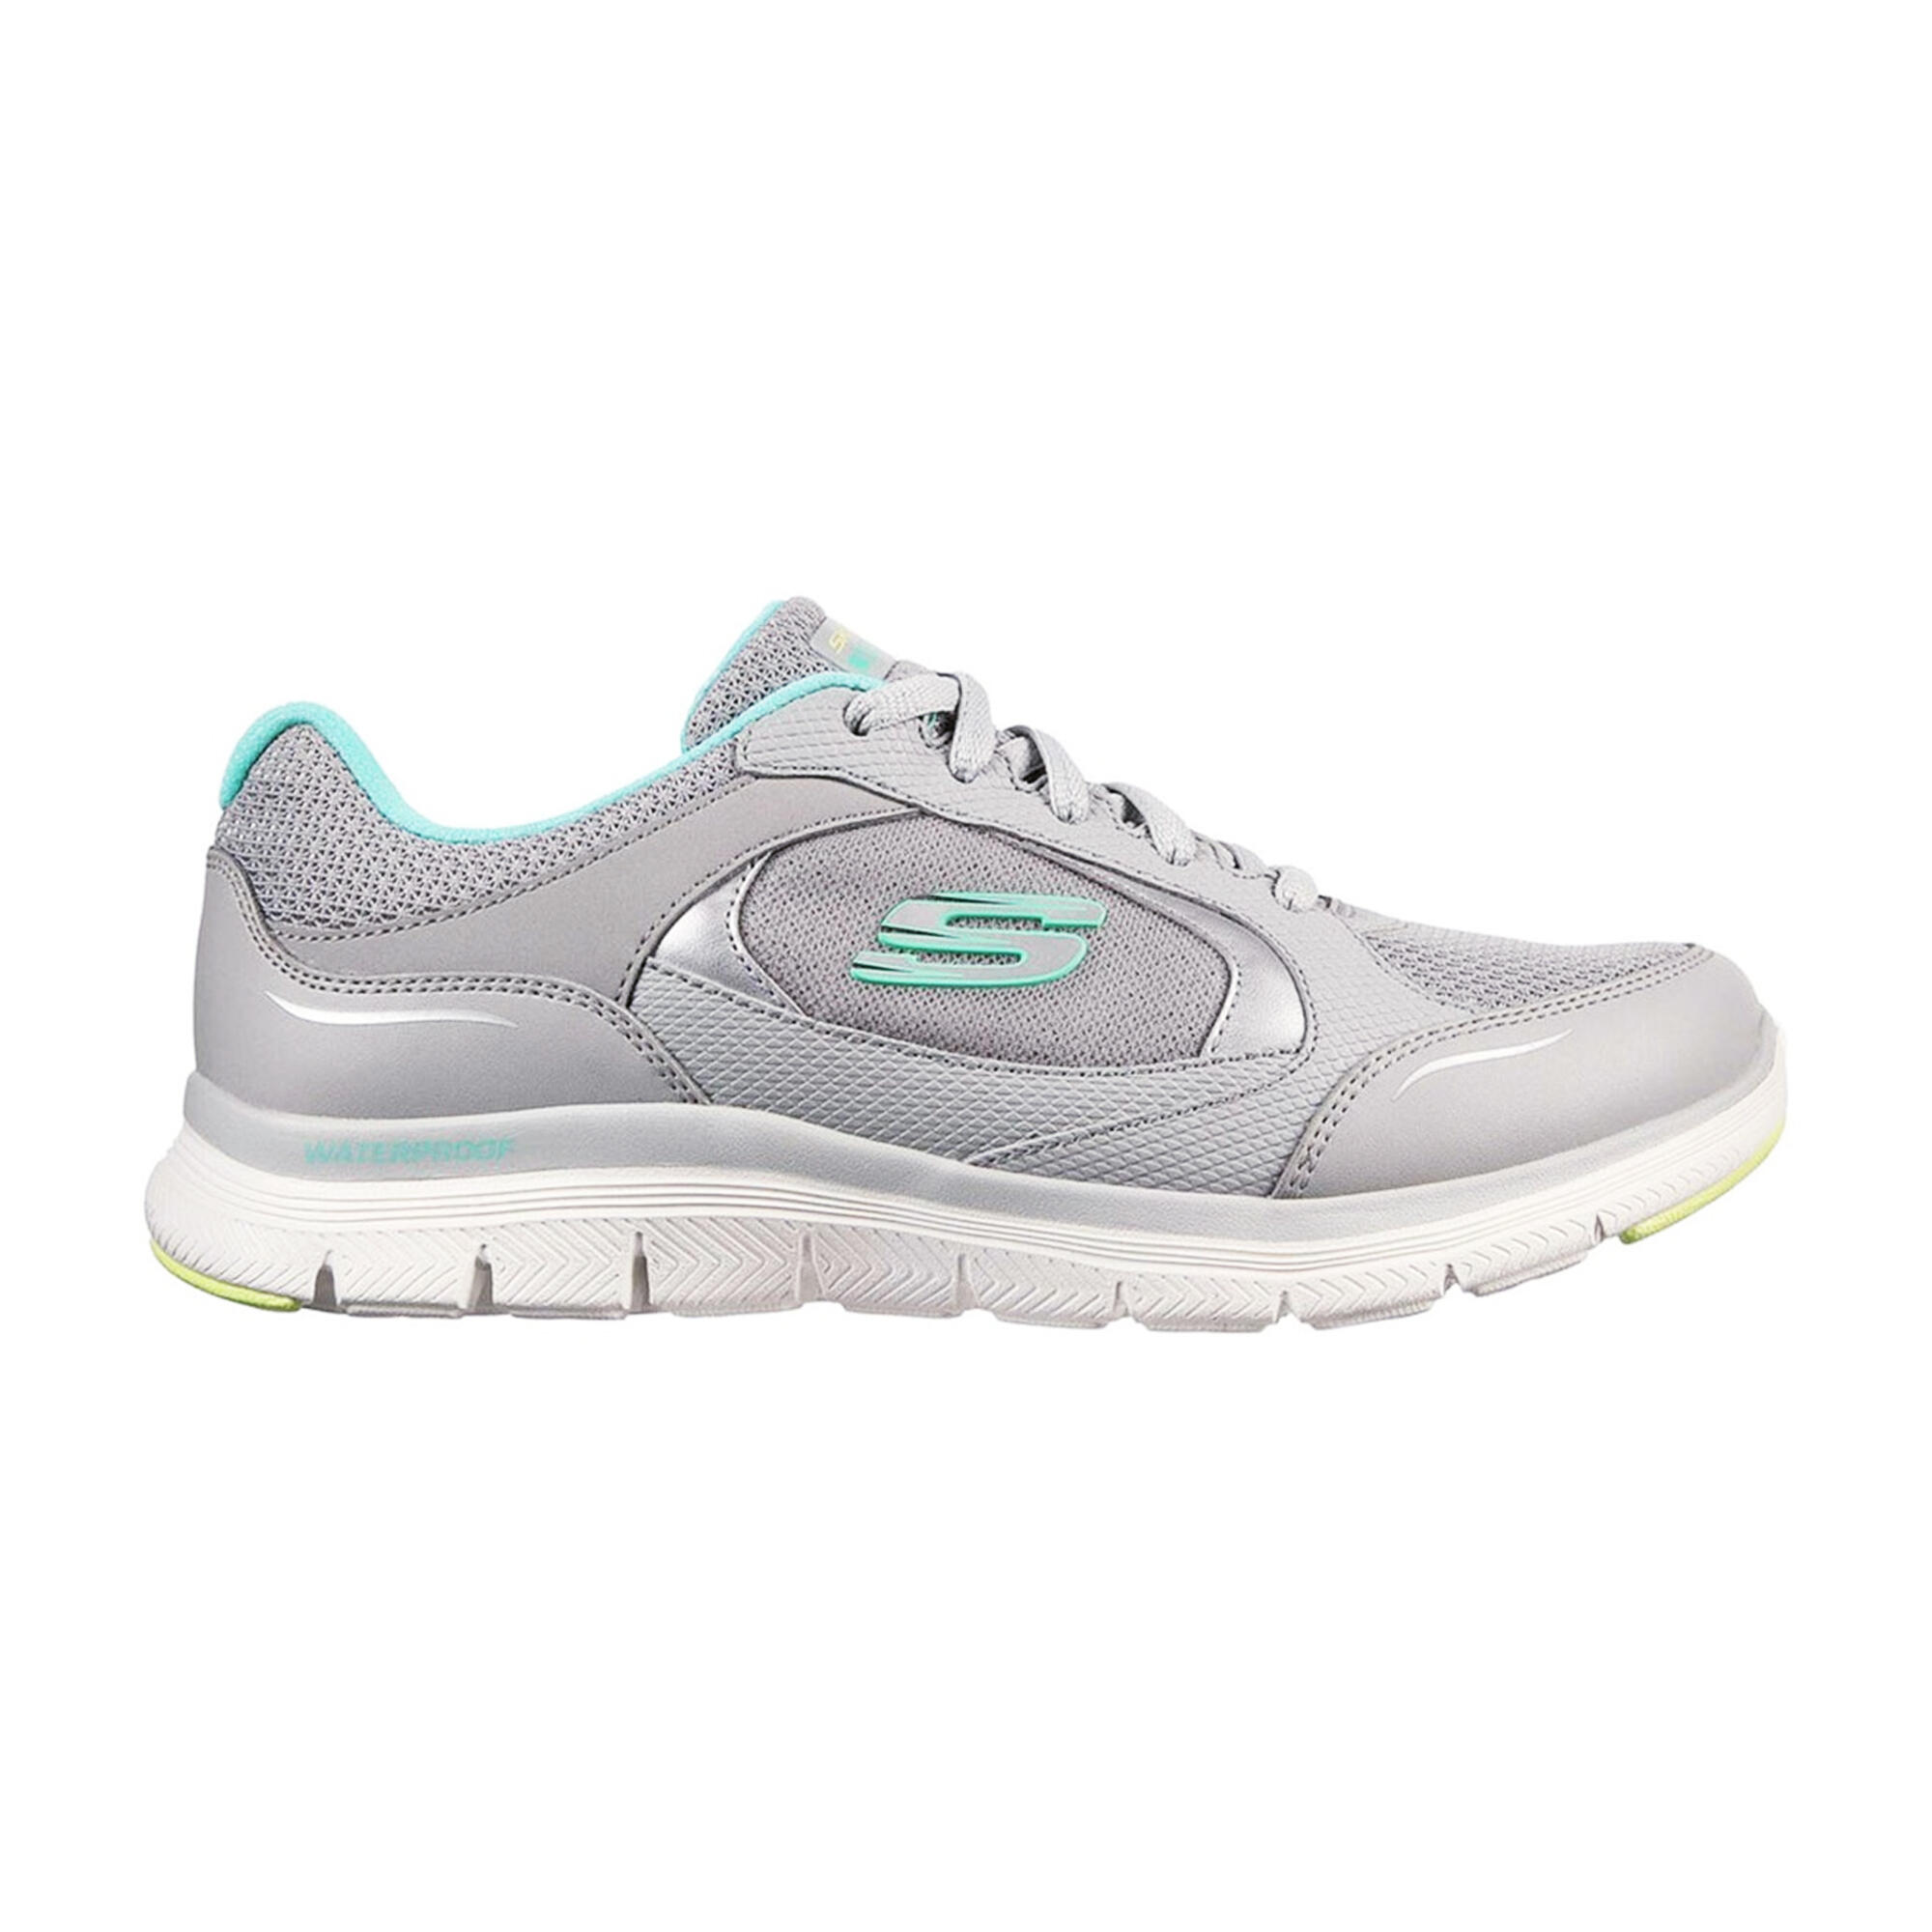 Womens/Ladies Flex Appeal 4.0 True Clarity Trainers (Grey/Turquoise) 3/5